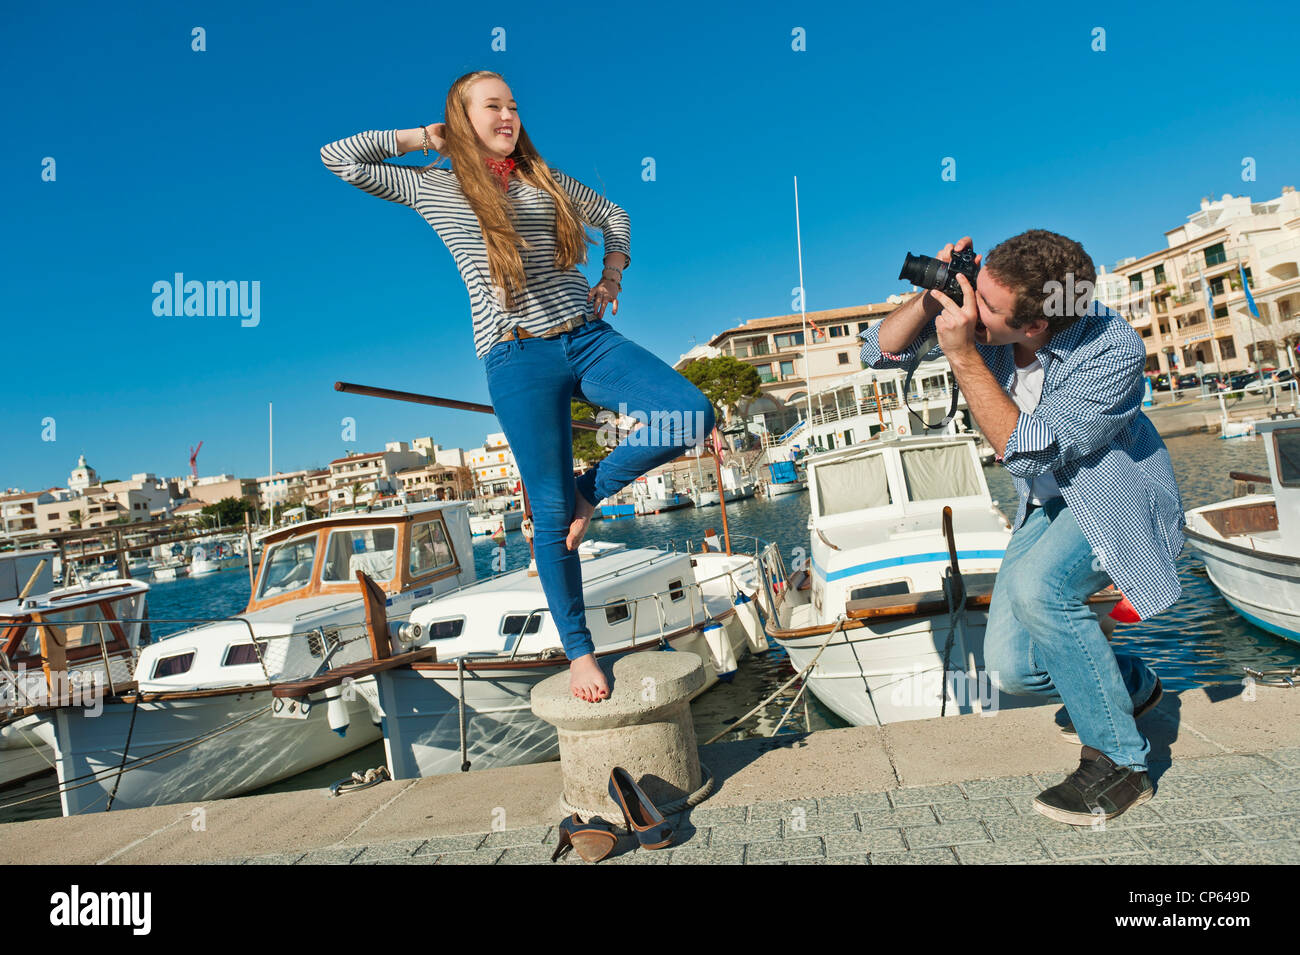 Spain, Mallorca, Couple taking pictures at harbour Stock Photo